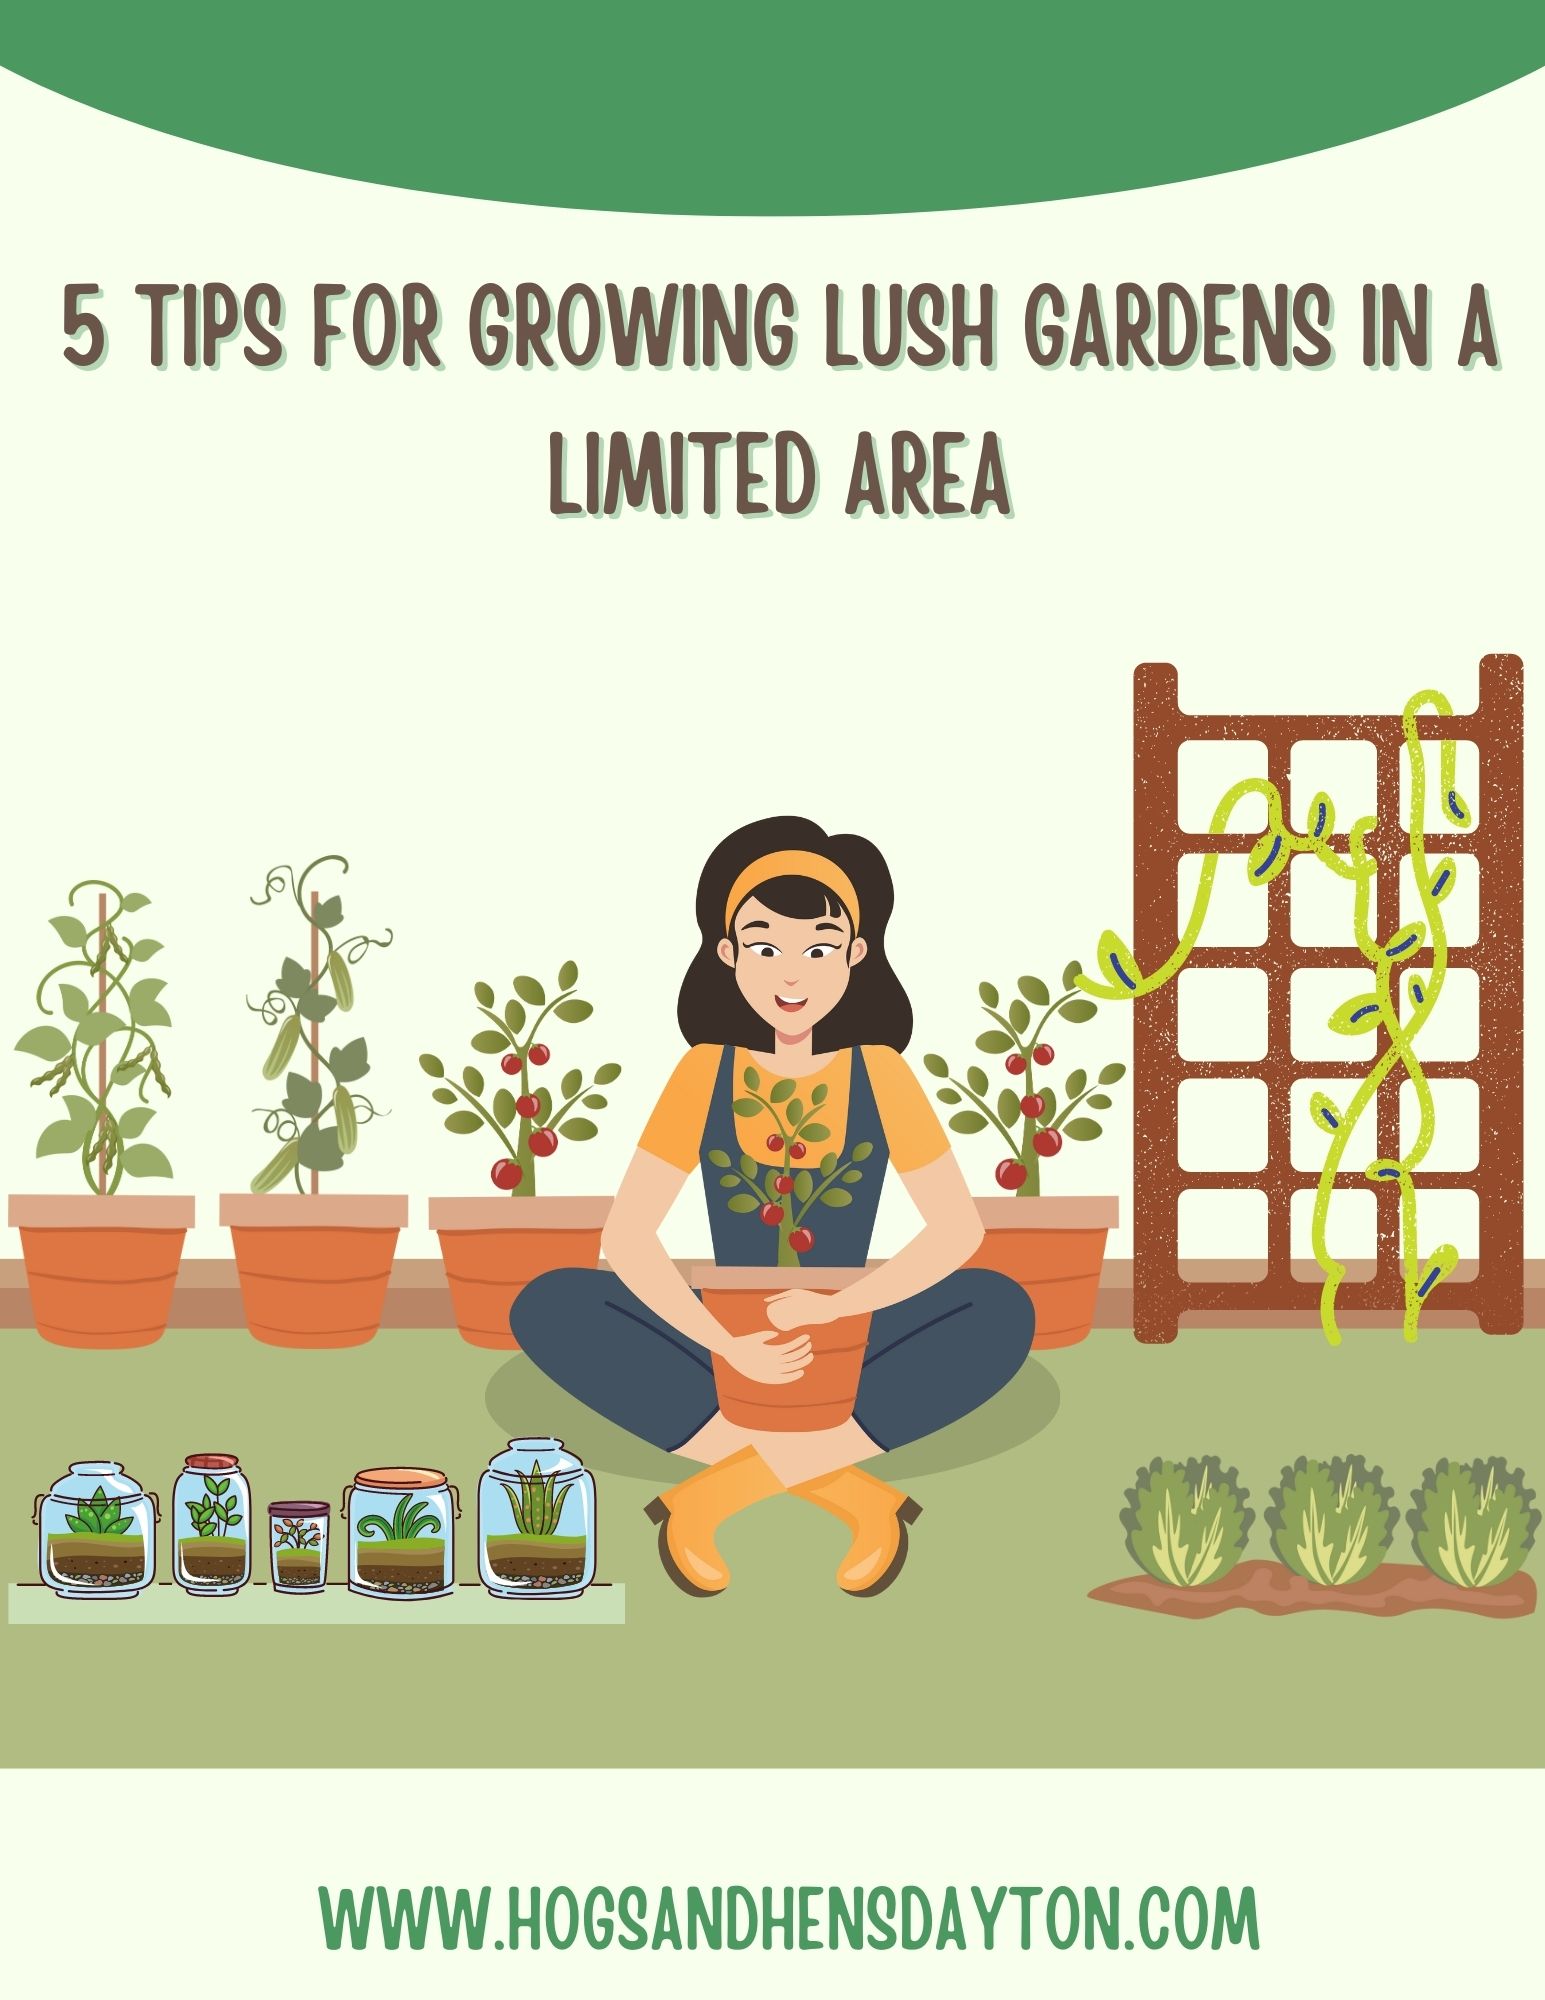 5 Tips for Growing Lush Gardens in Limited Area